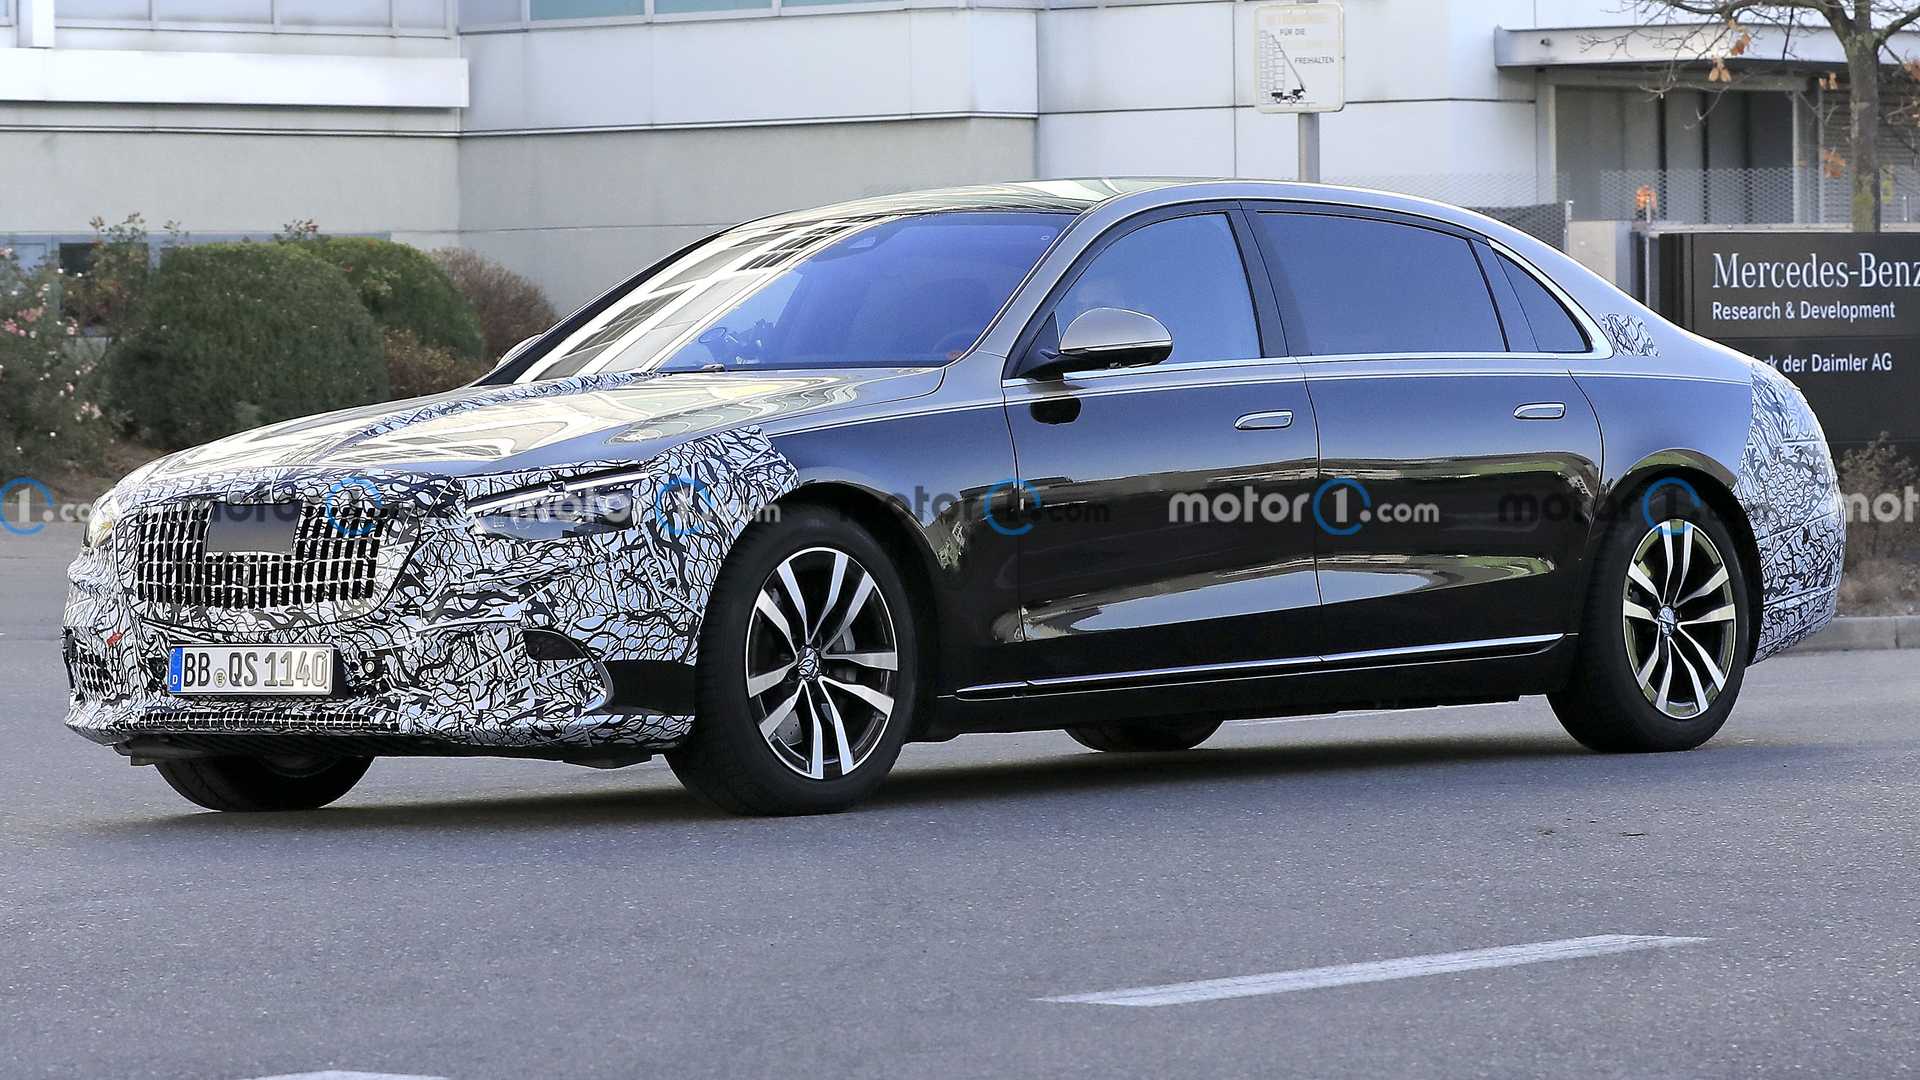 Mercedes Maybach S Class Spied Looking Snazzy With Little Camo